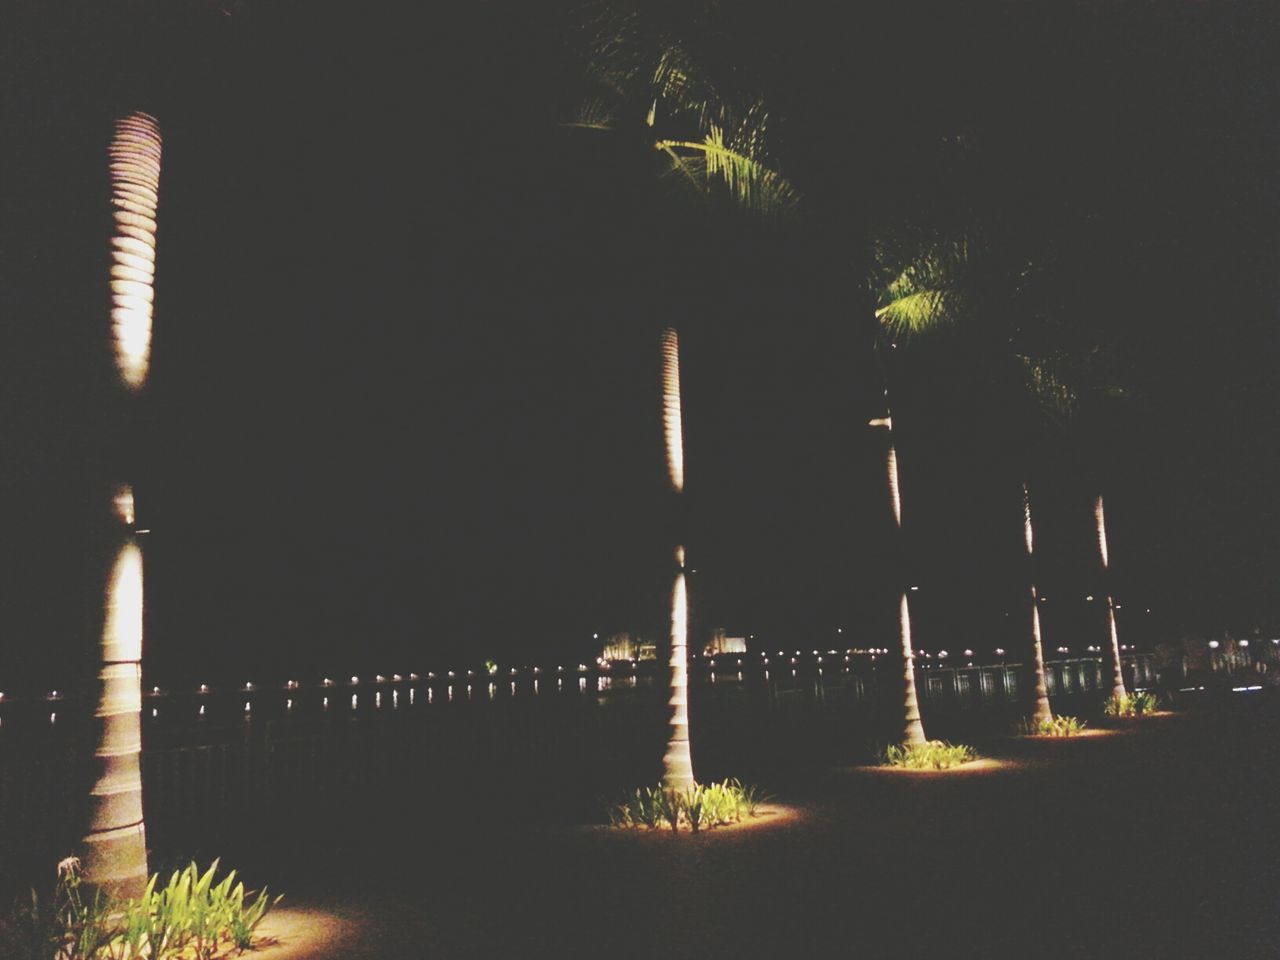 Palm trees in a row at night